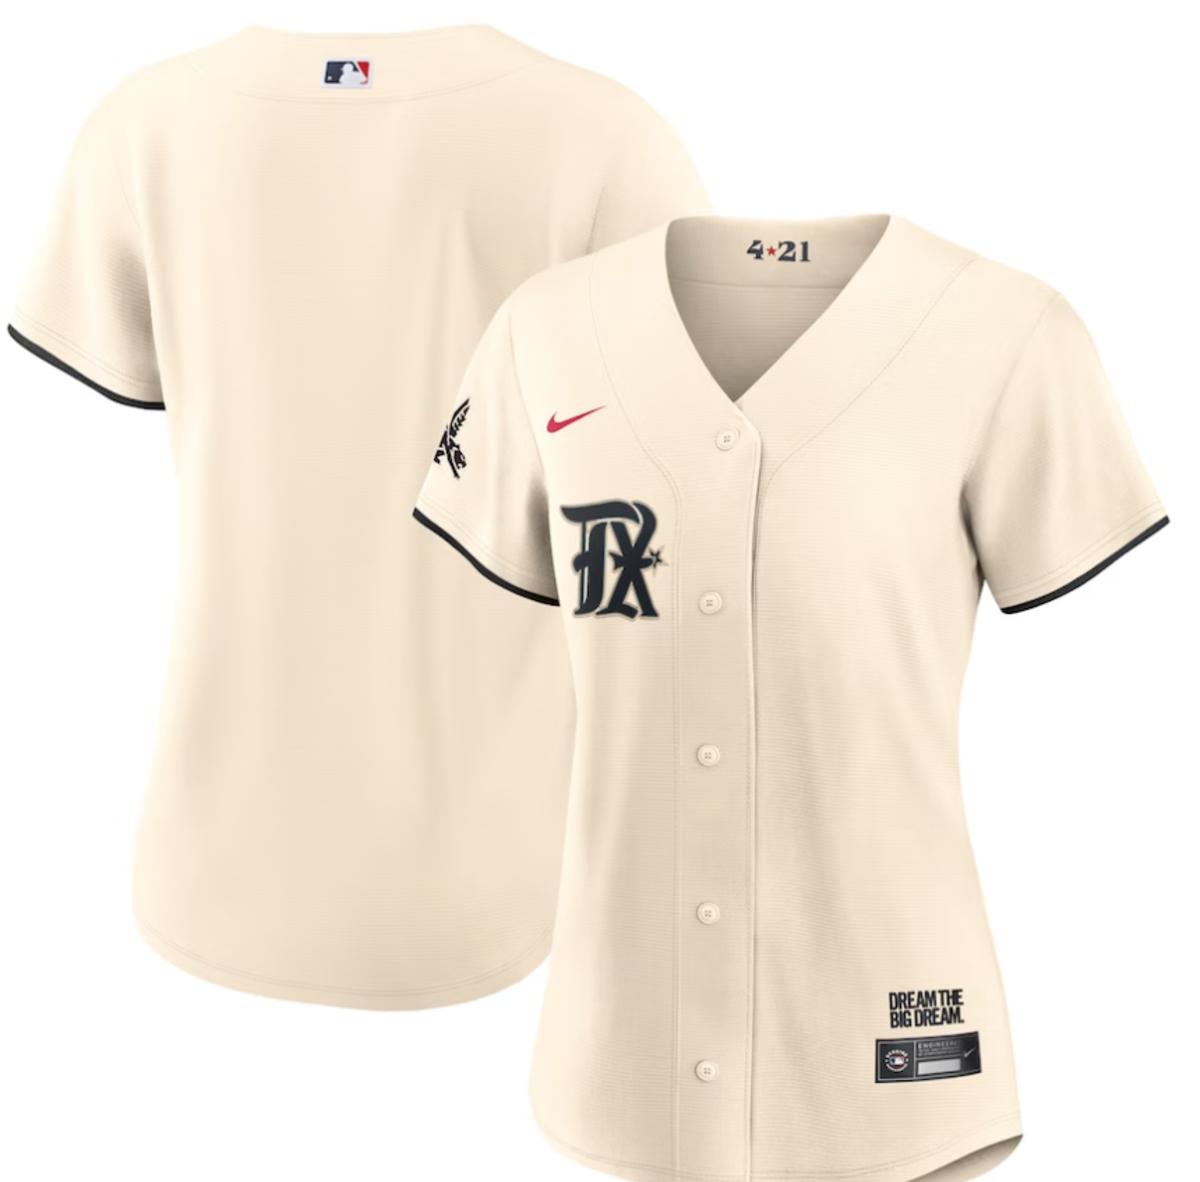 What do y'all think the Rangers' City Connect Jerseys will be like